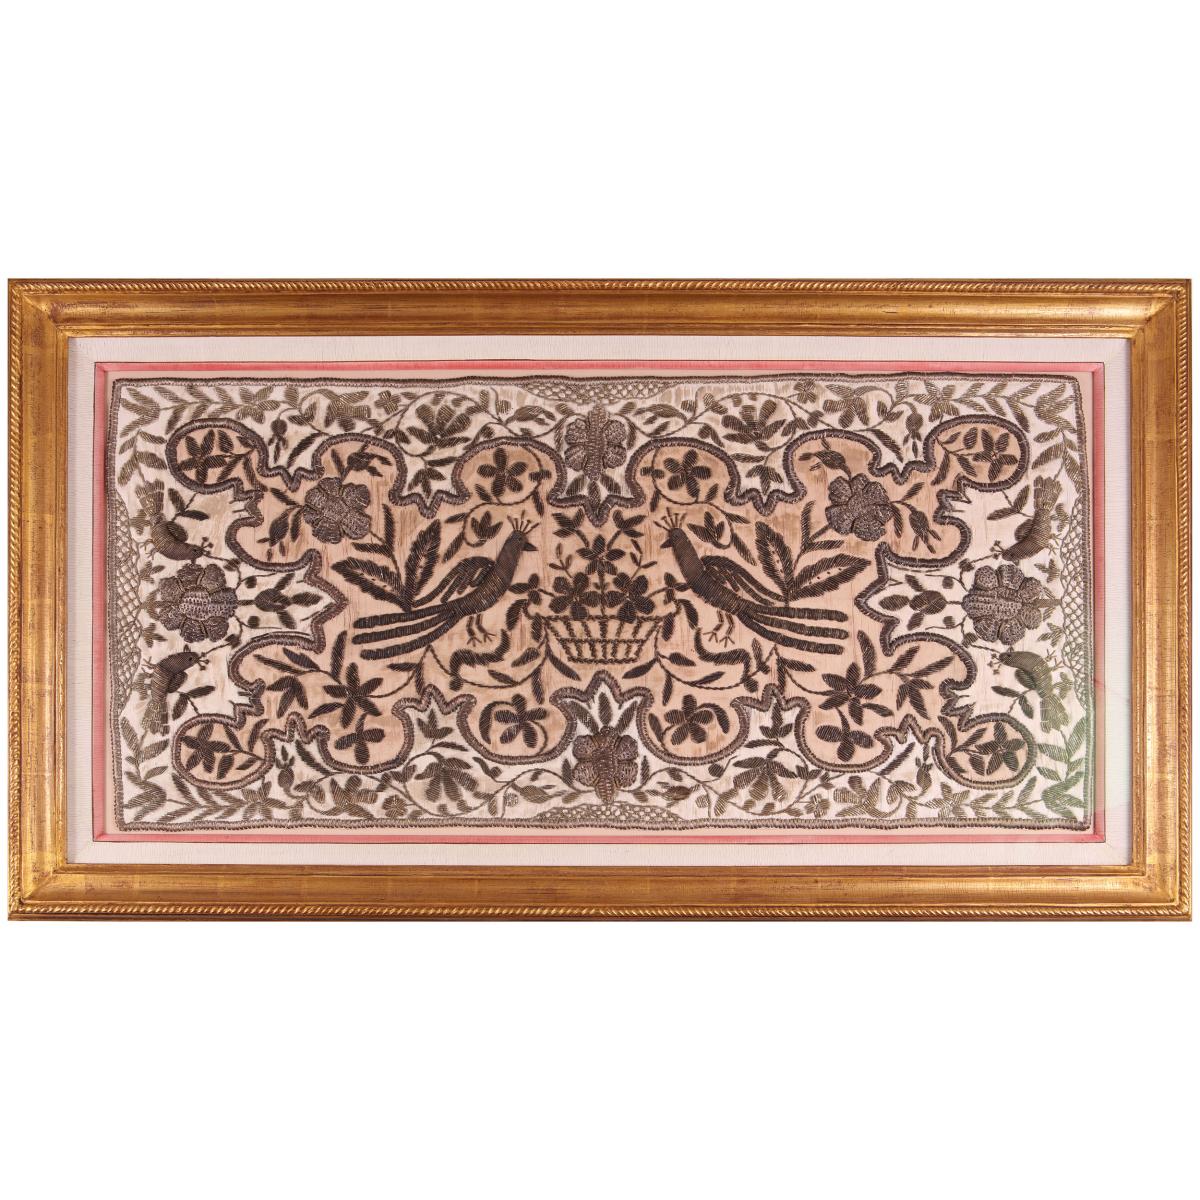 19th century metal-thread embroidery panel